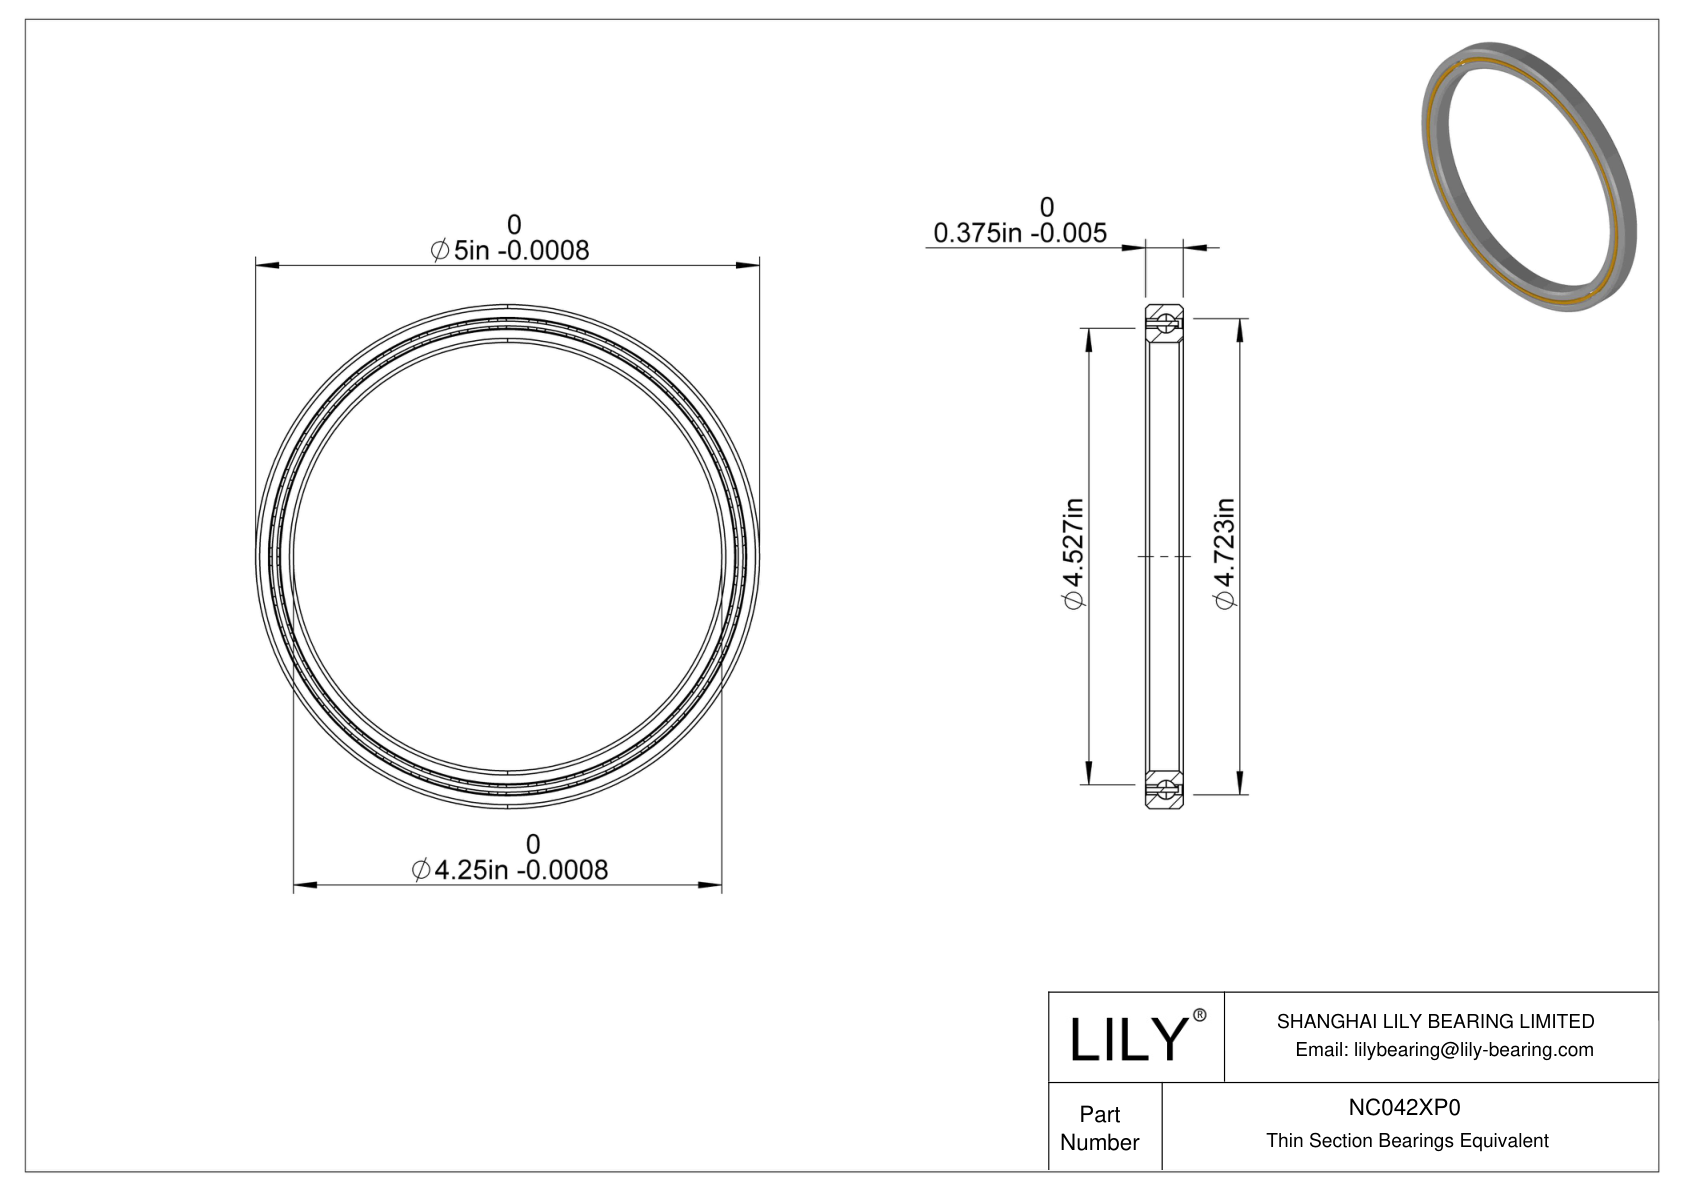 NC042XP0 Constant Section (CS) Bearings cad drawing